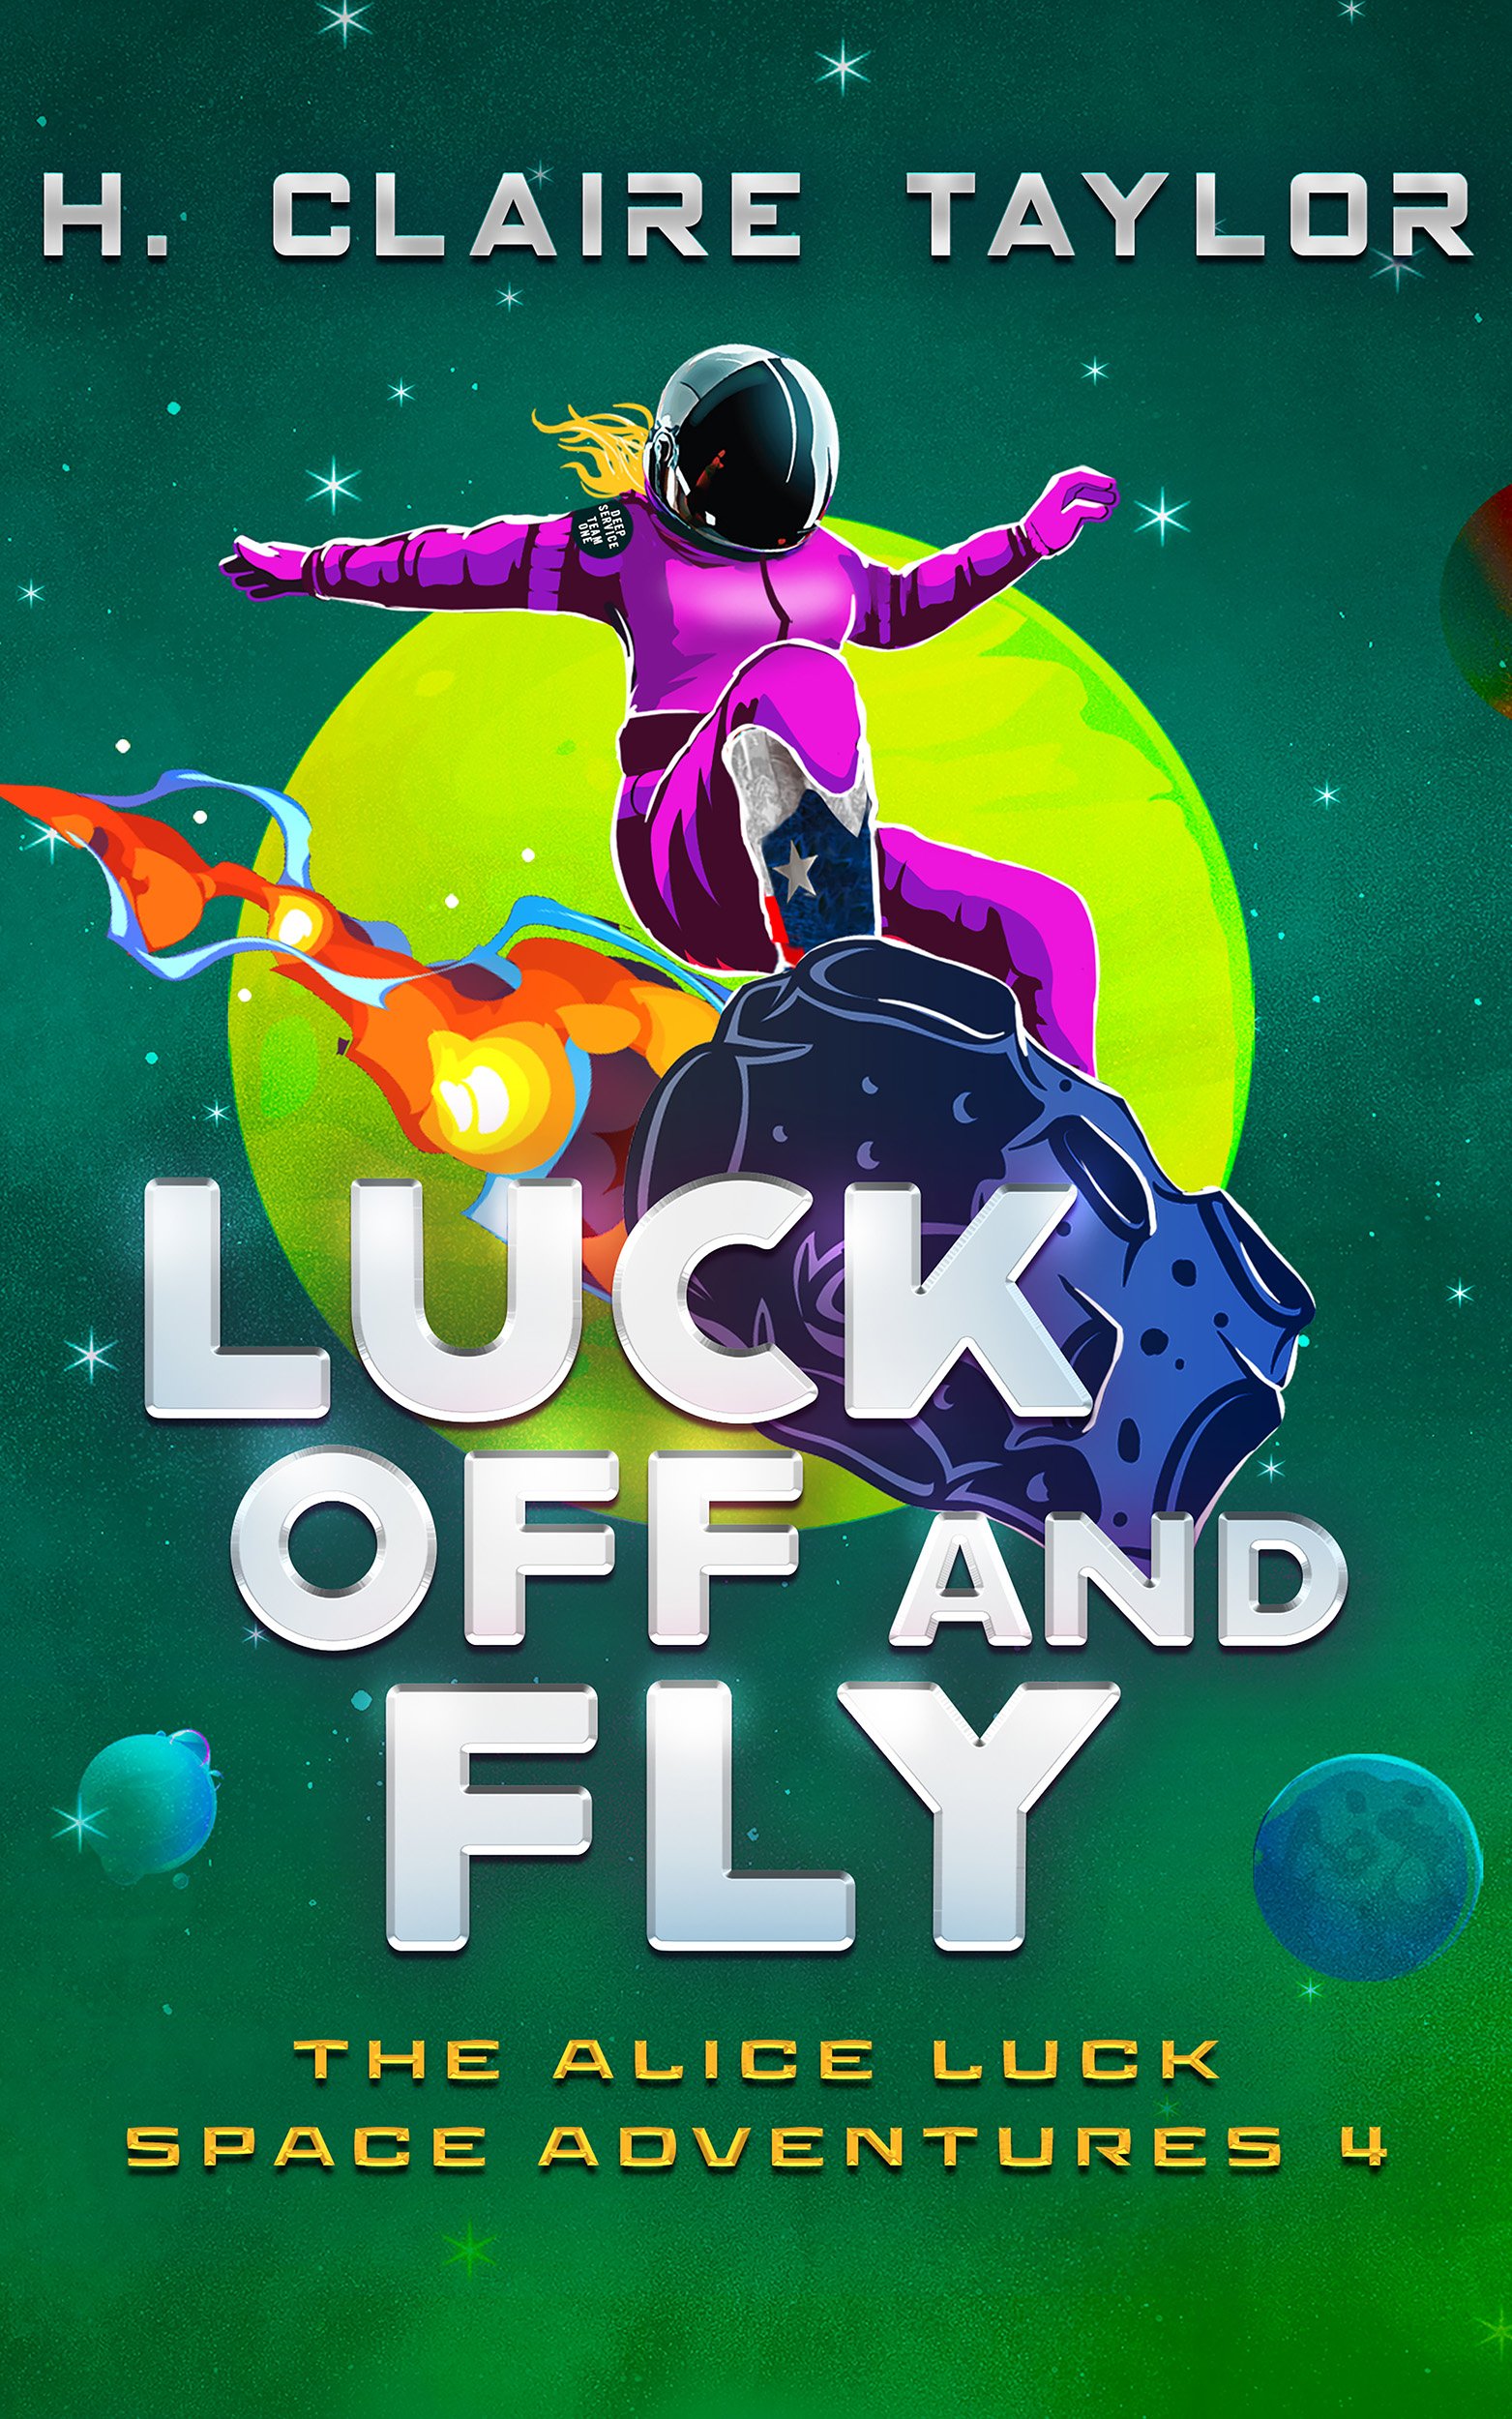 Luck Off and Fly